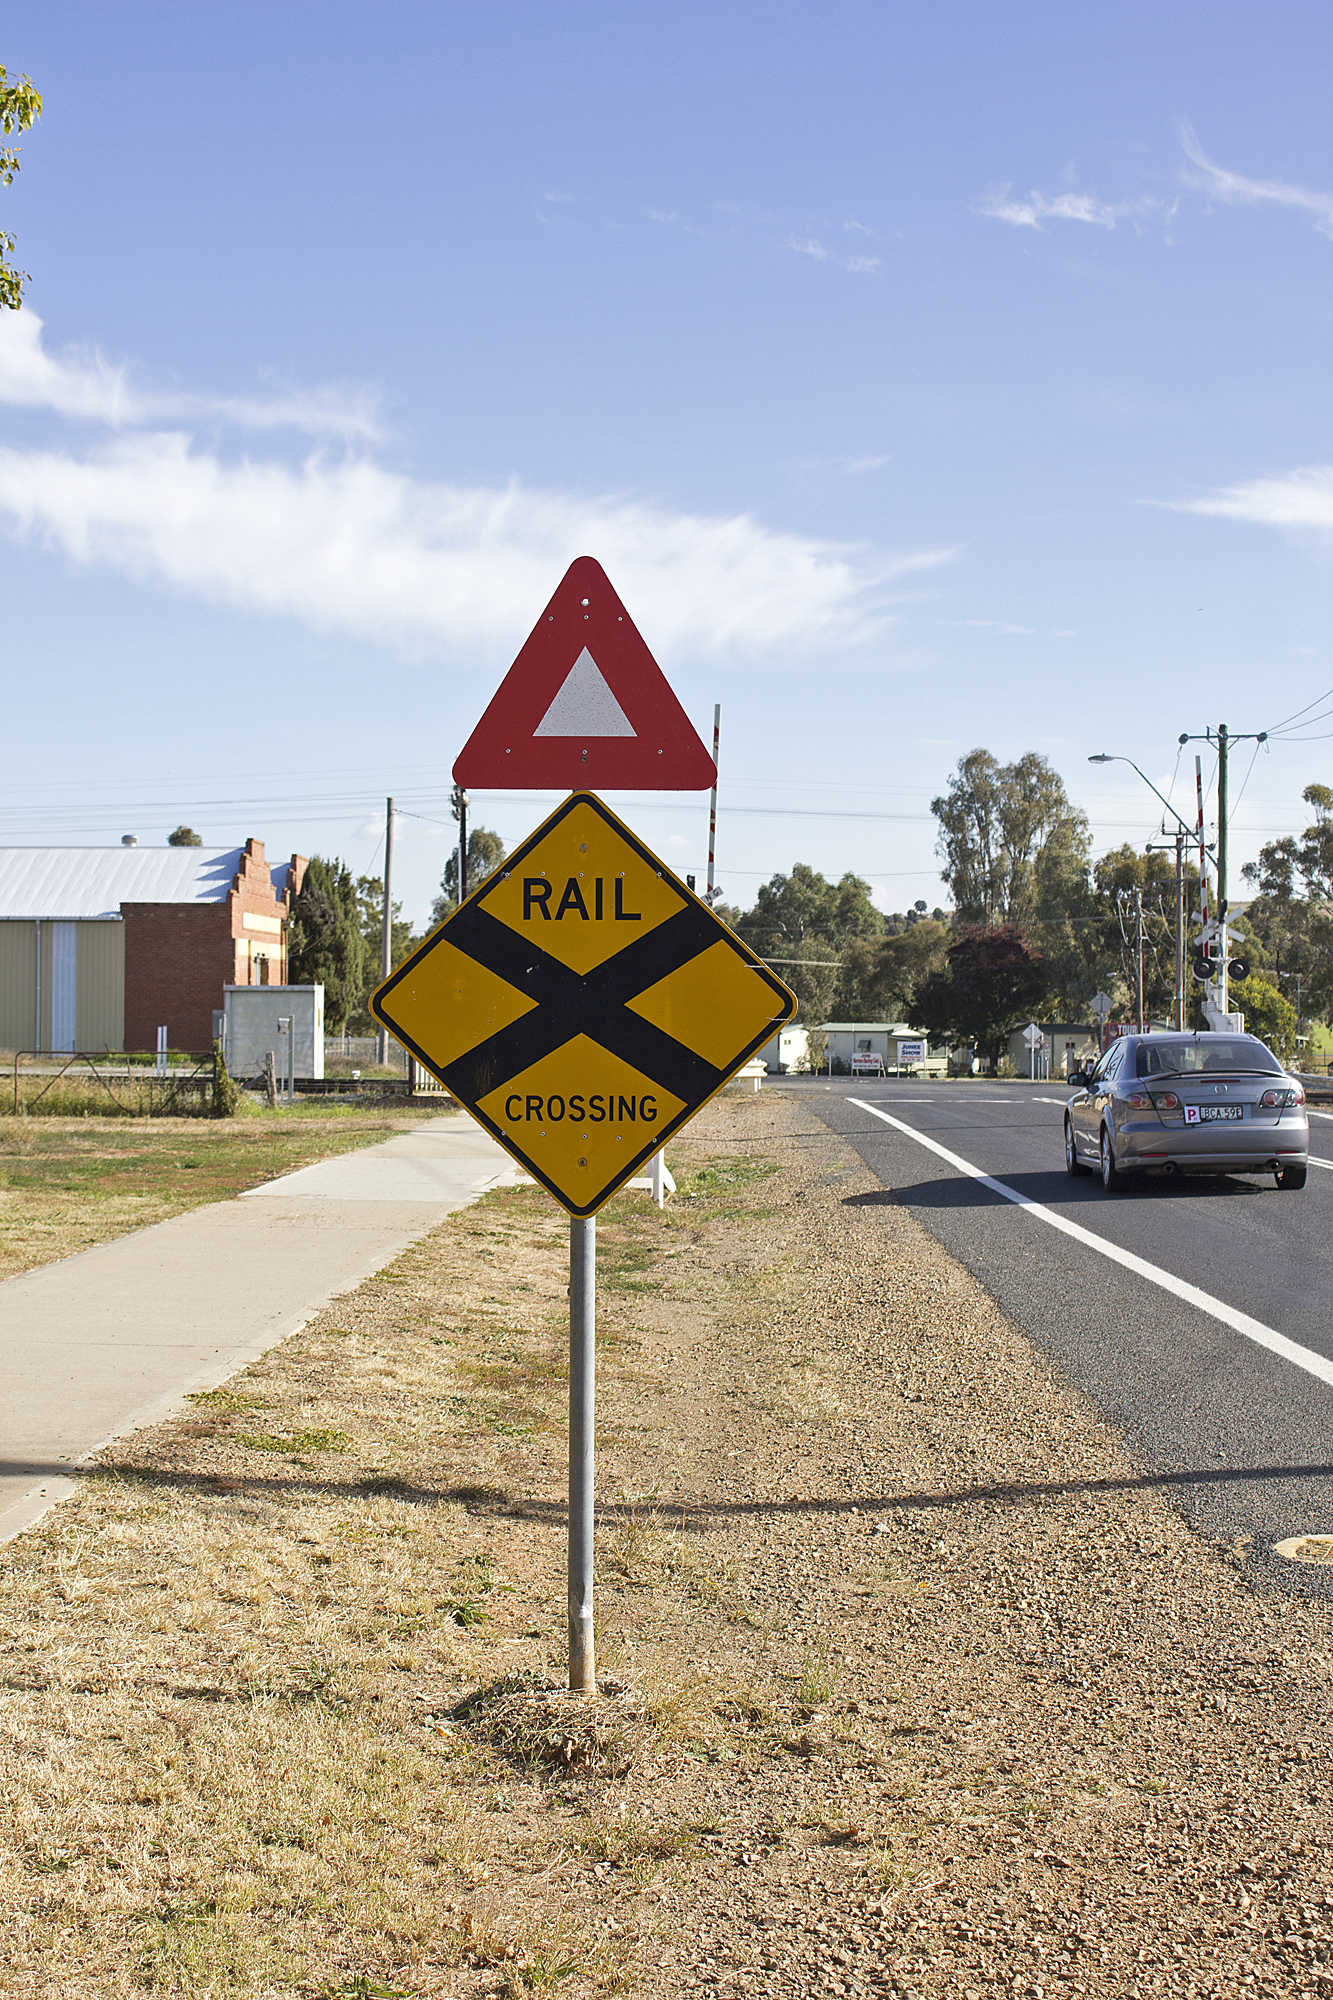 File Warning Triangle W8 1 And Rail Crossing W7 3 Signs Near The Level Crossing At Gate Street In Junee Jpg Wikimedia Commons